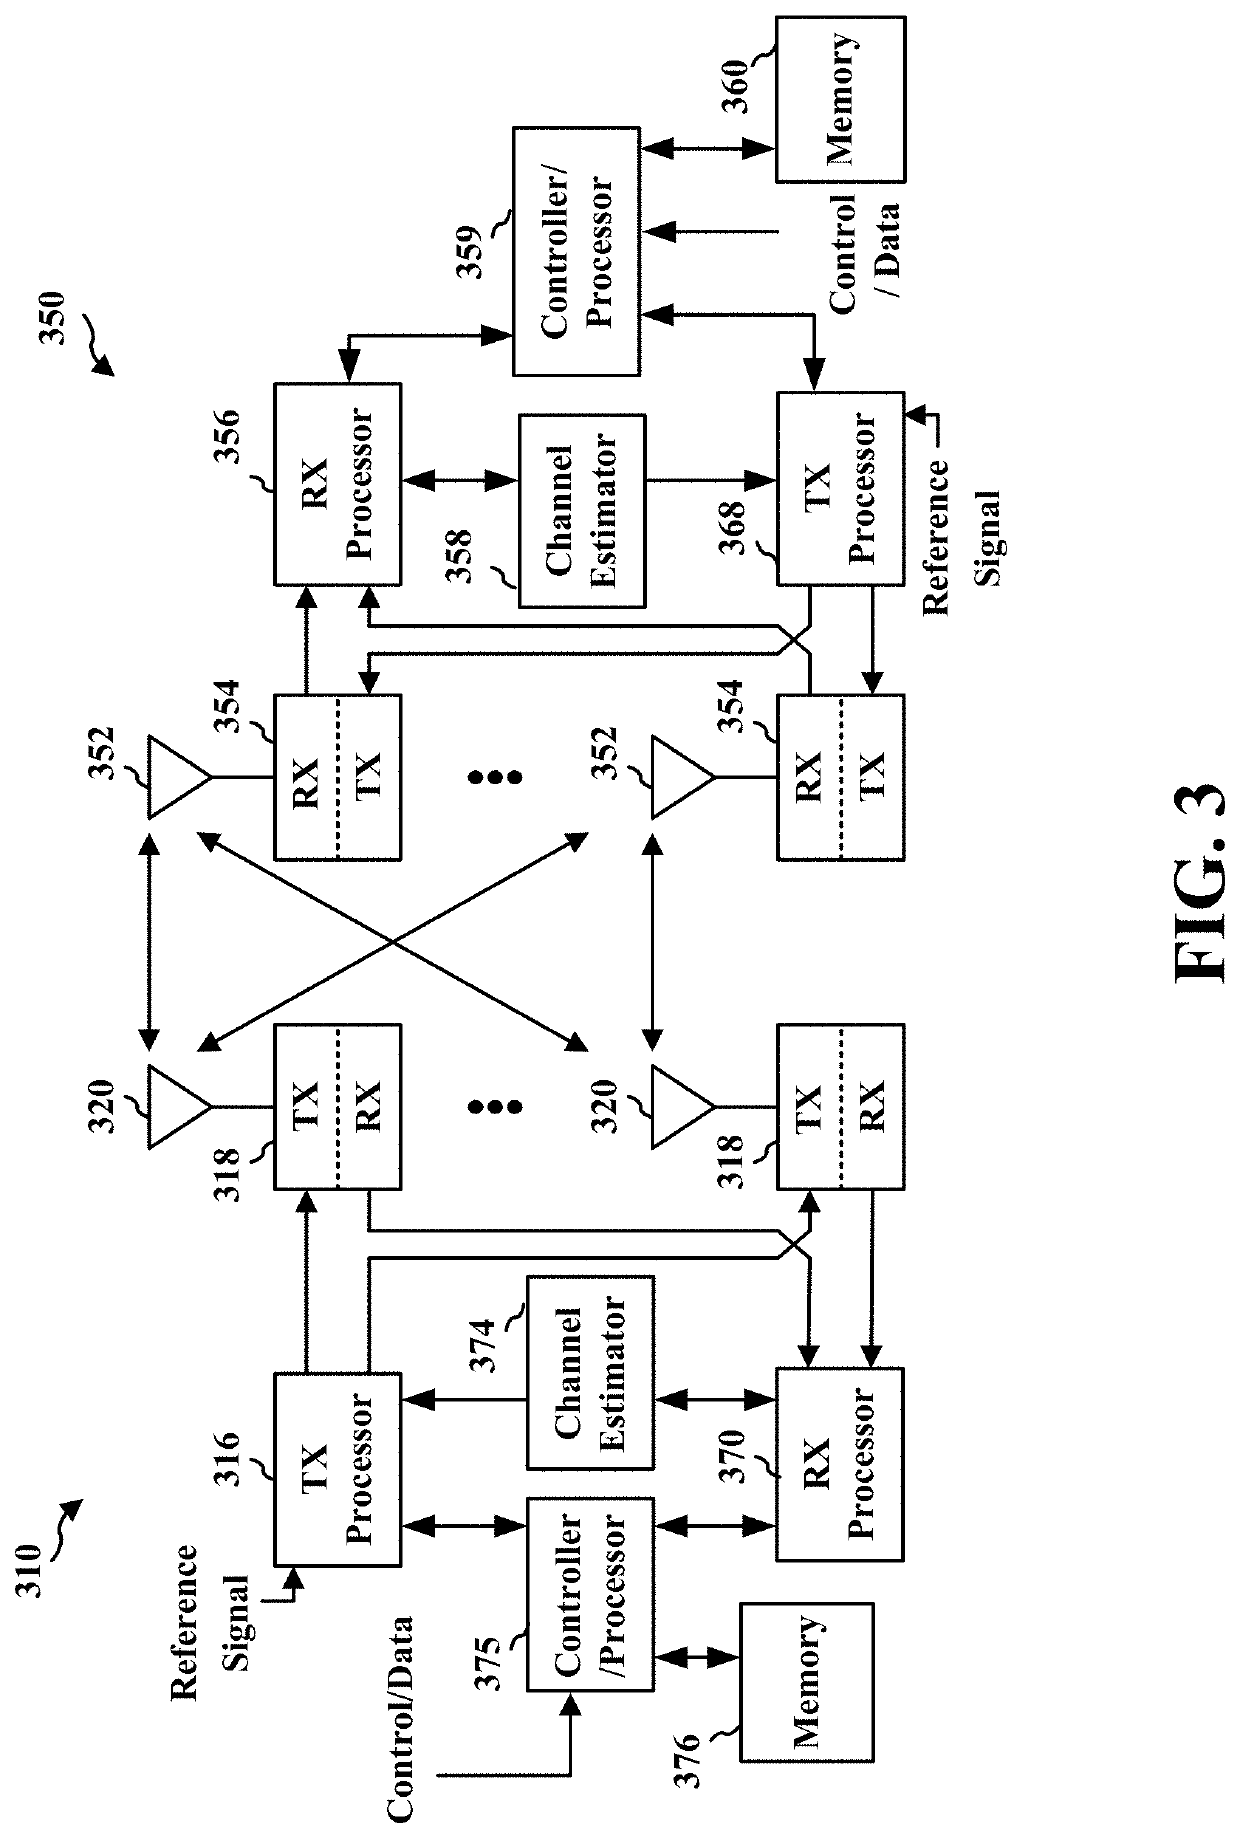 Channel state information measurement and feedback for transmission mode switching